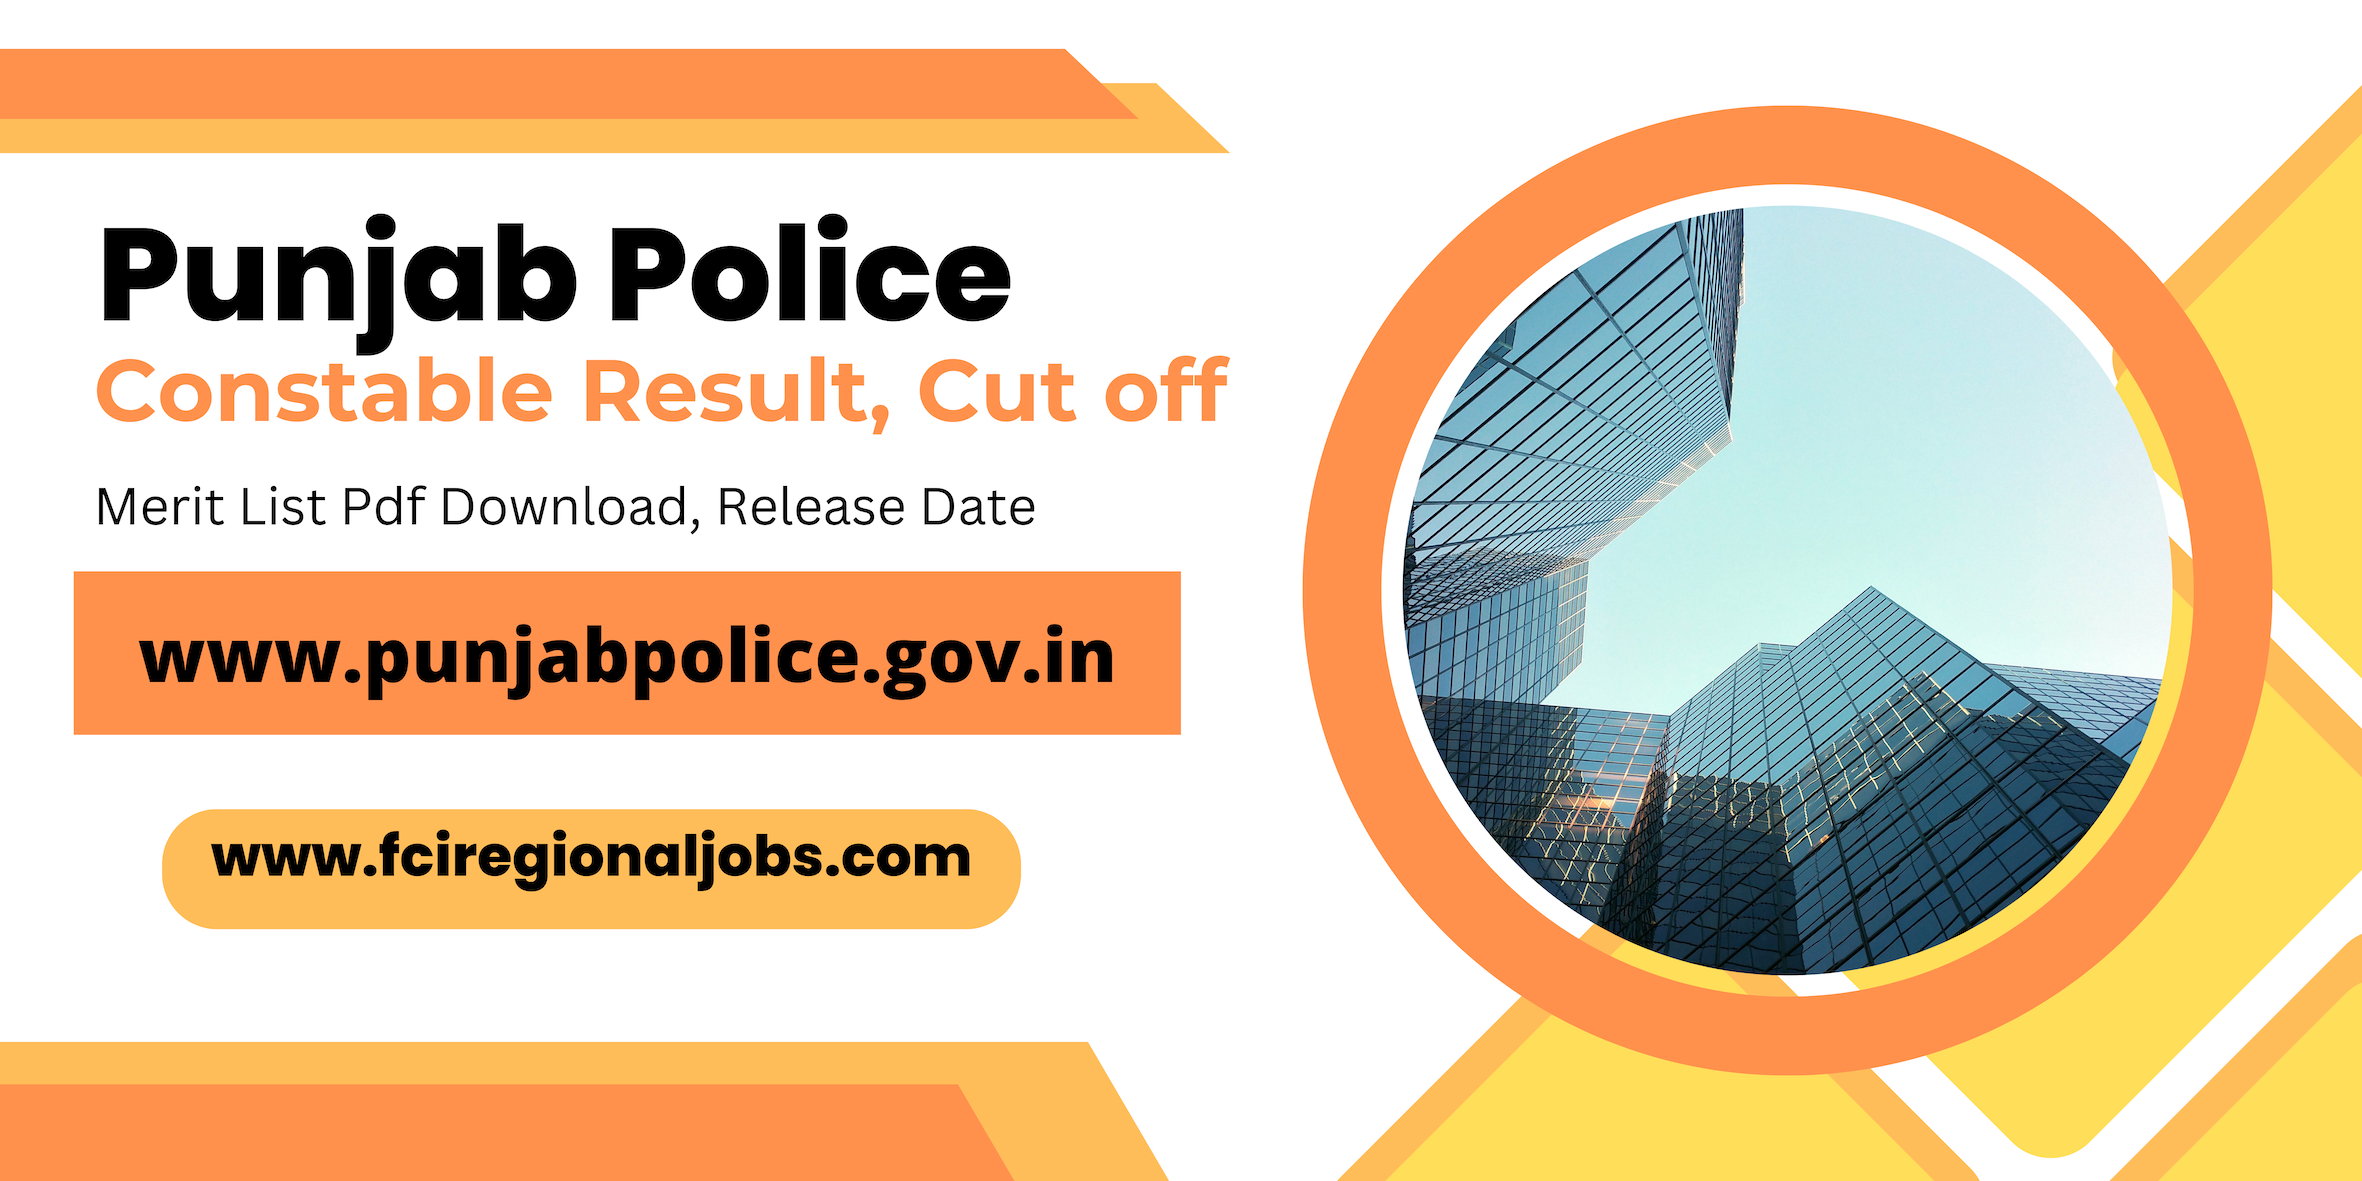 Punjab Police Constable Result 2023